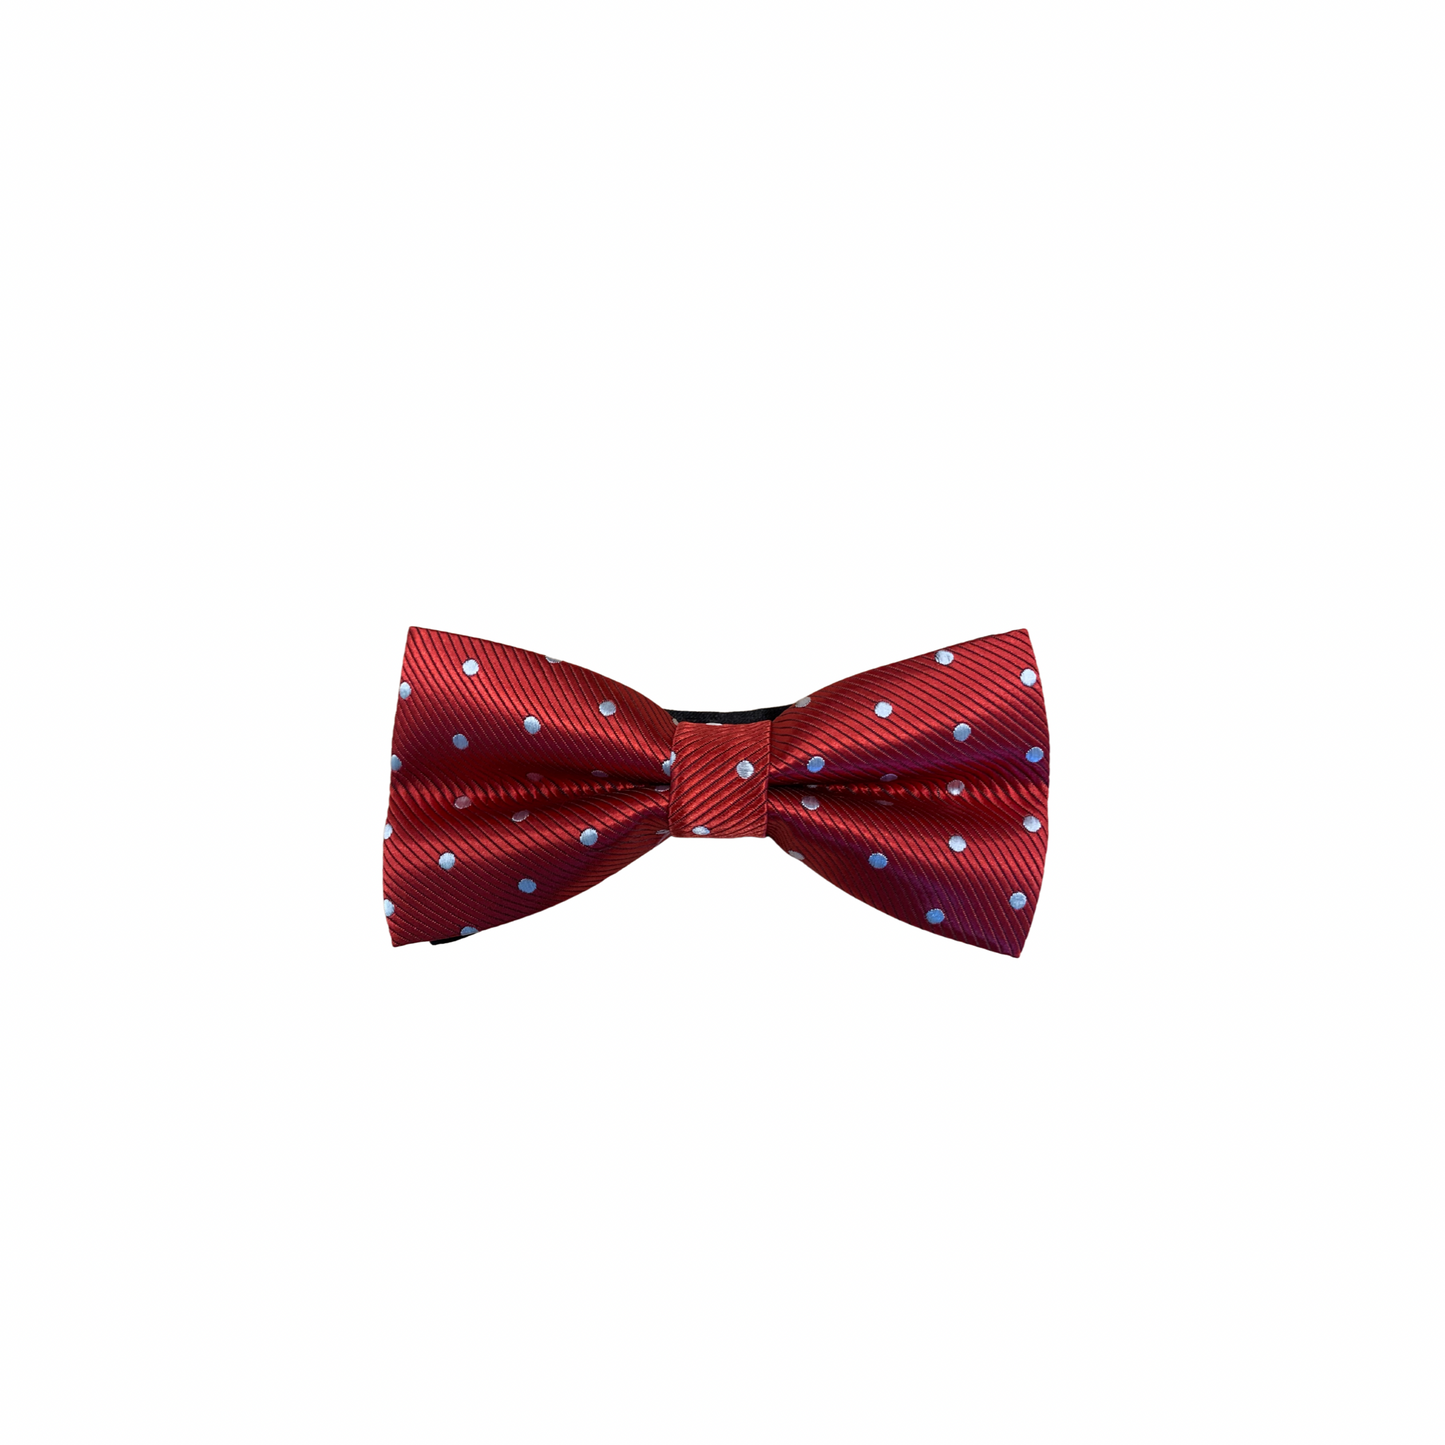 Butterfly El padrino in red color with white dots, length 12 cm, width 6 cm